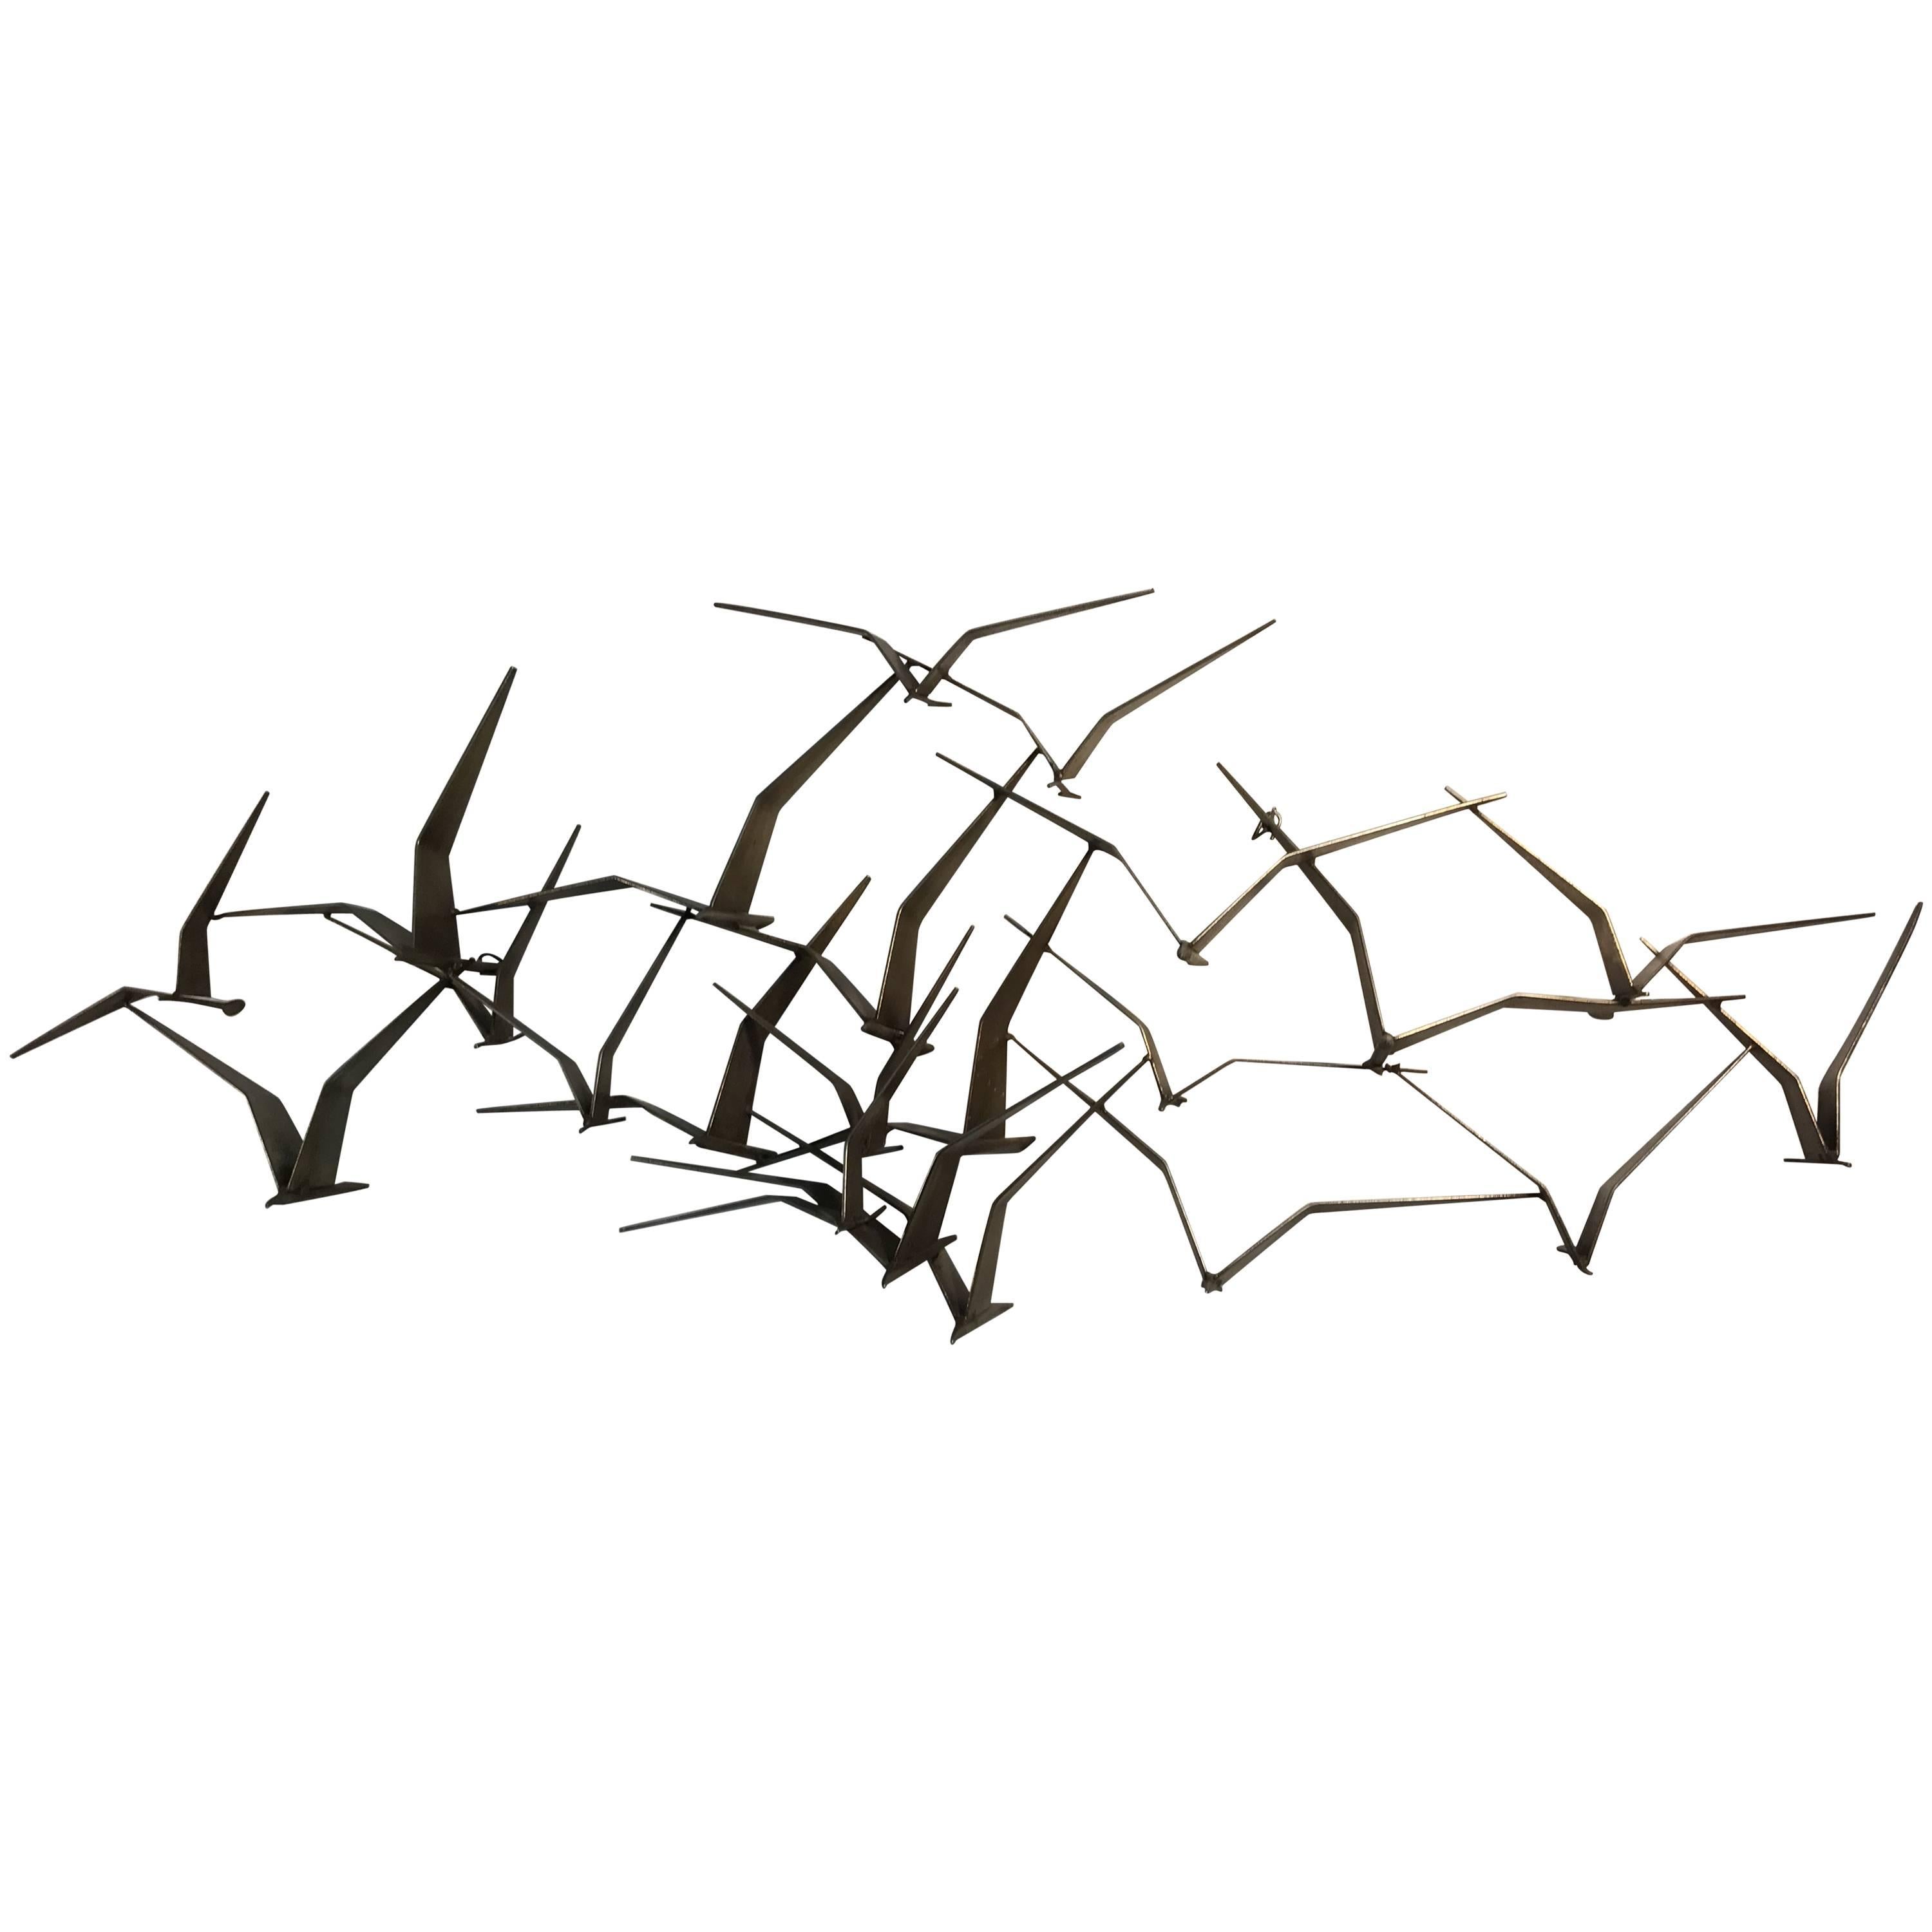 Elegant and Iconic Curtis Jere Birds in Flight Wall Sculpture For Sale